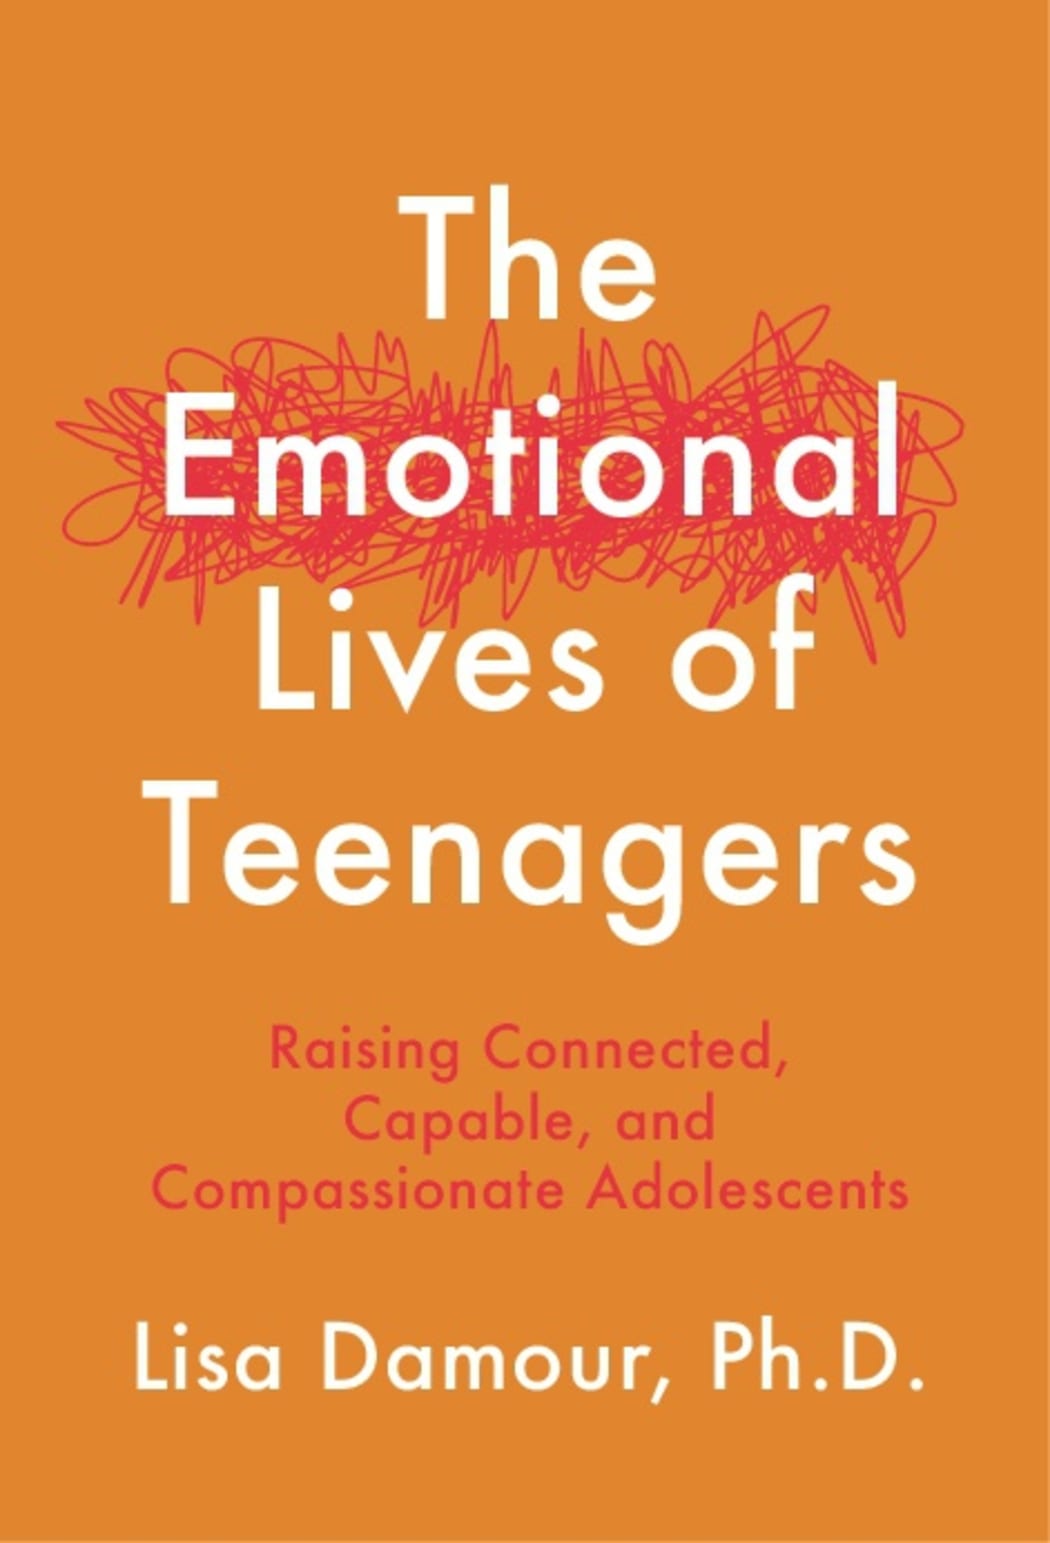 Emotional Lives of Teenagers book cover